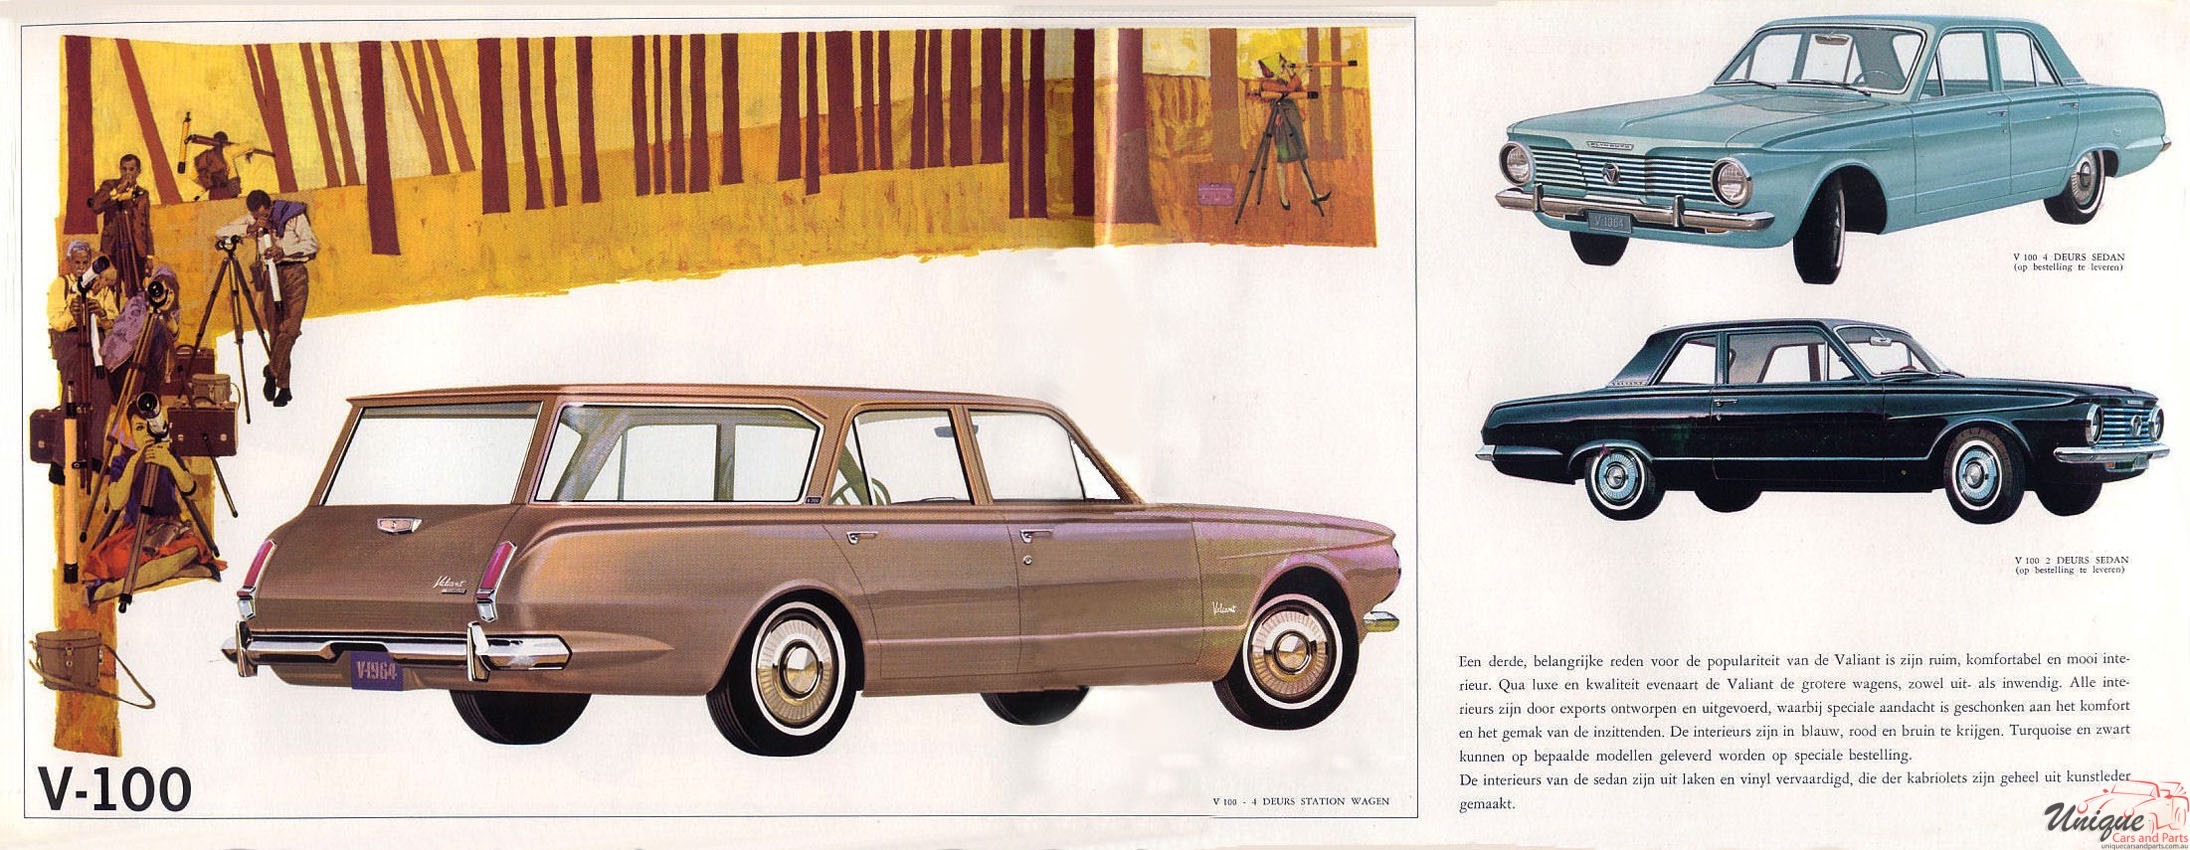 1964 Plymouth Valiant Brochure Page 3